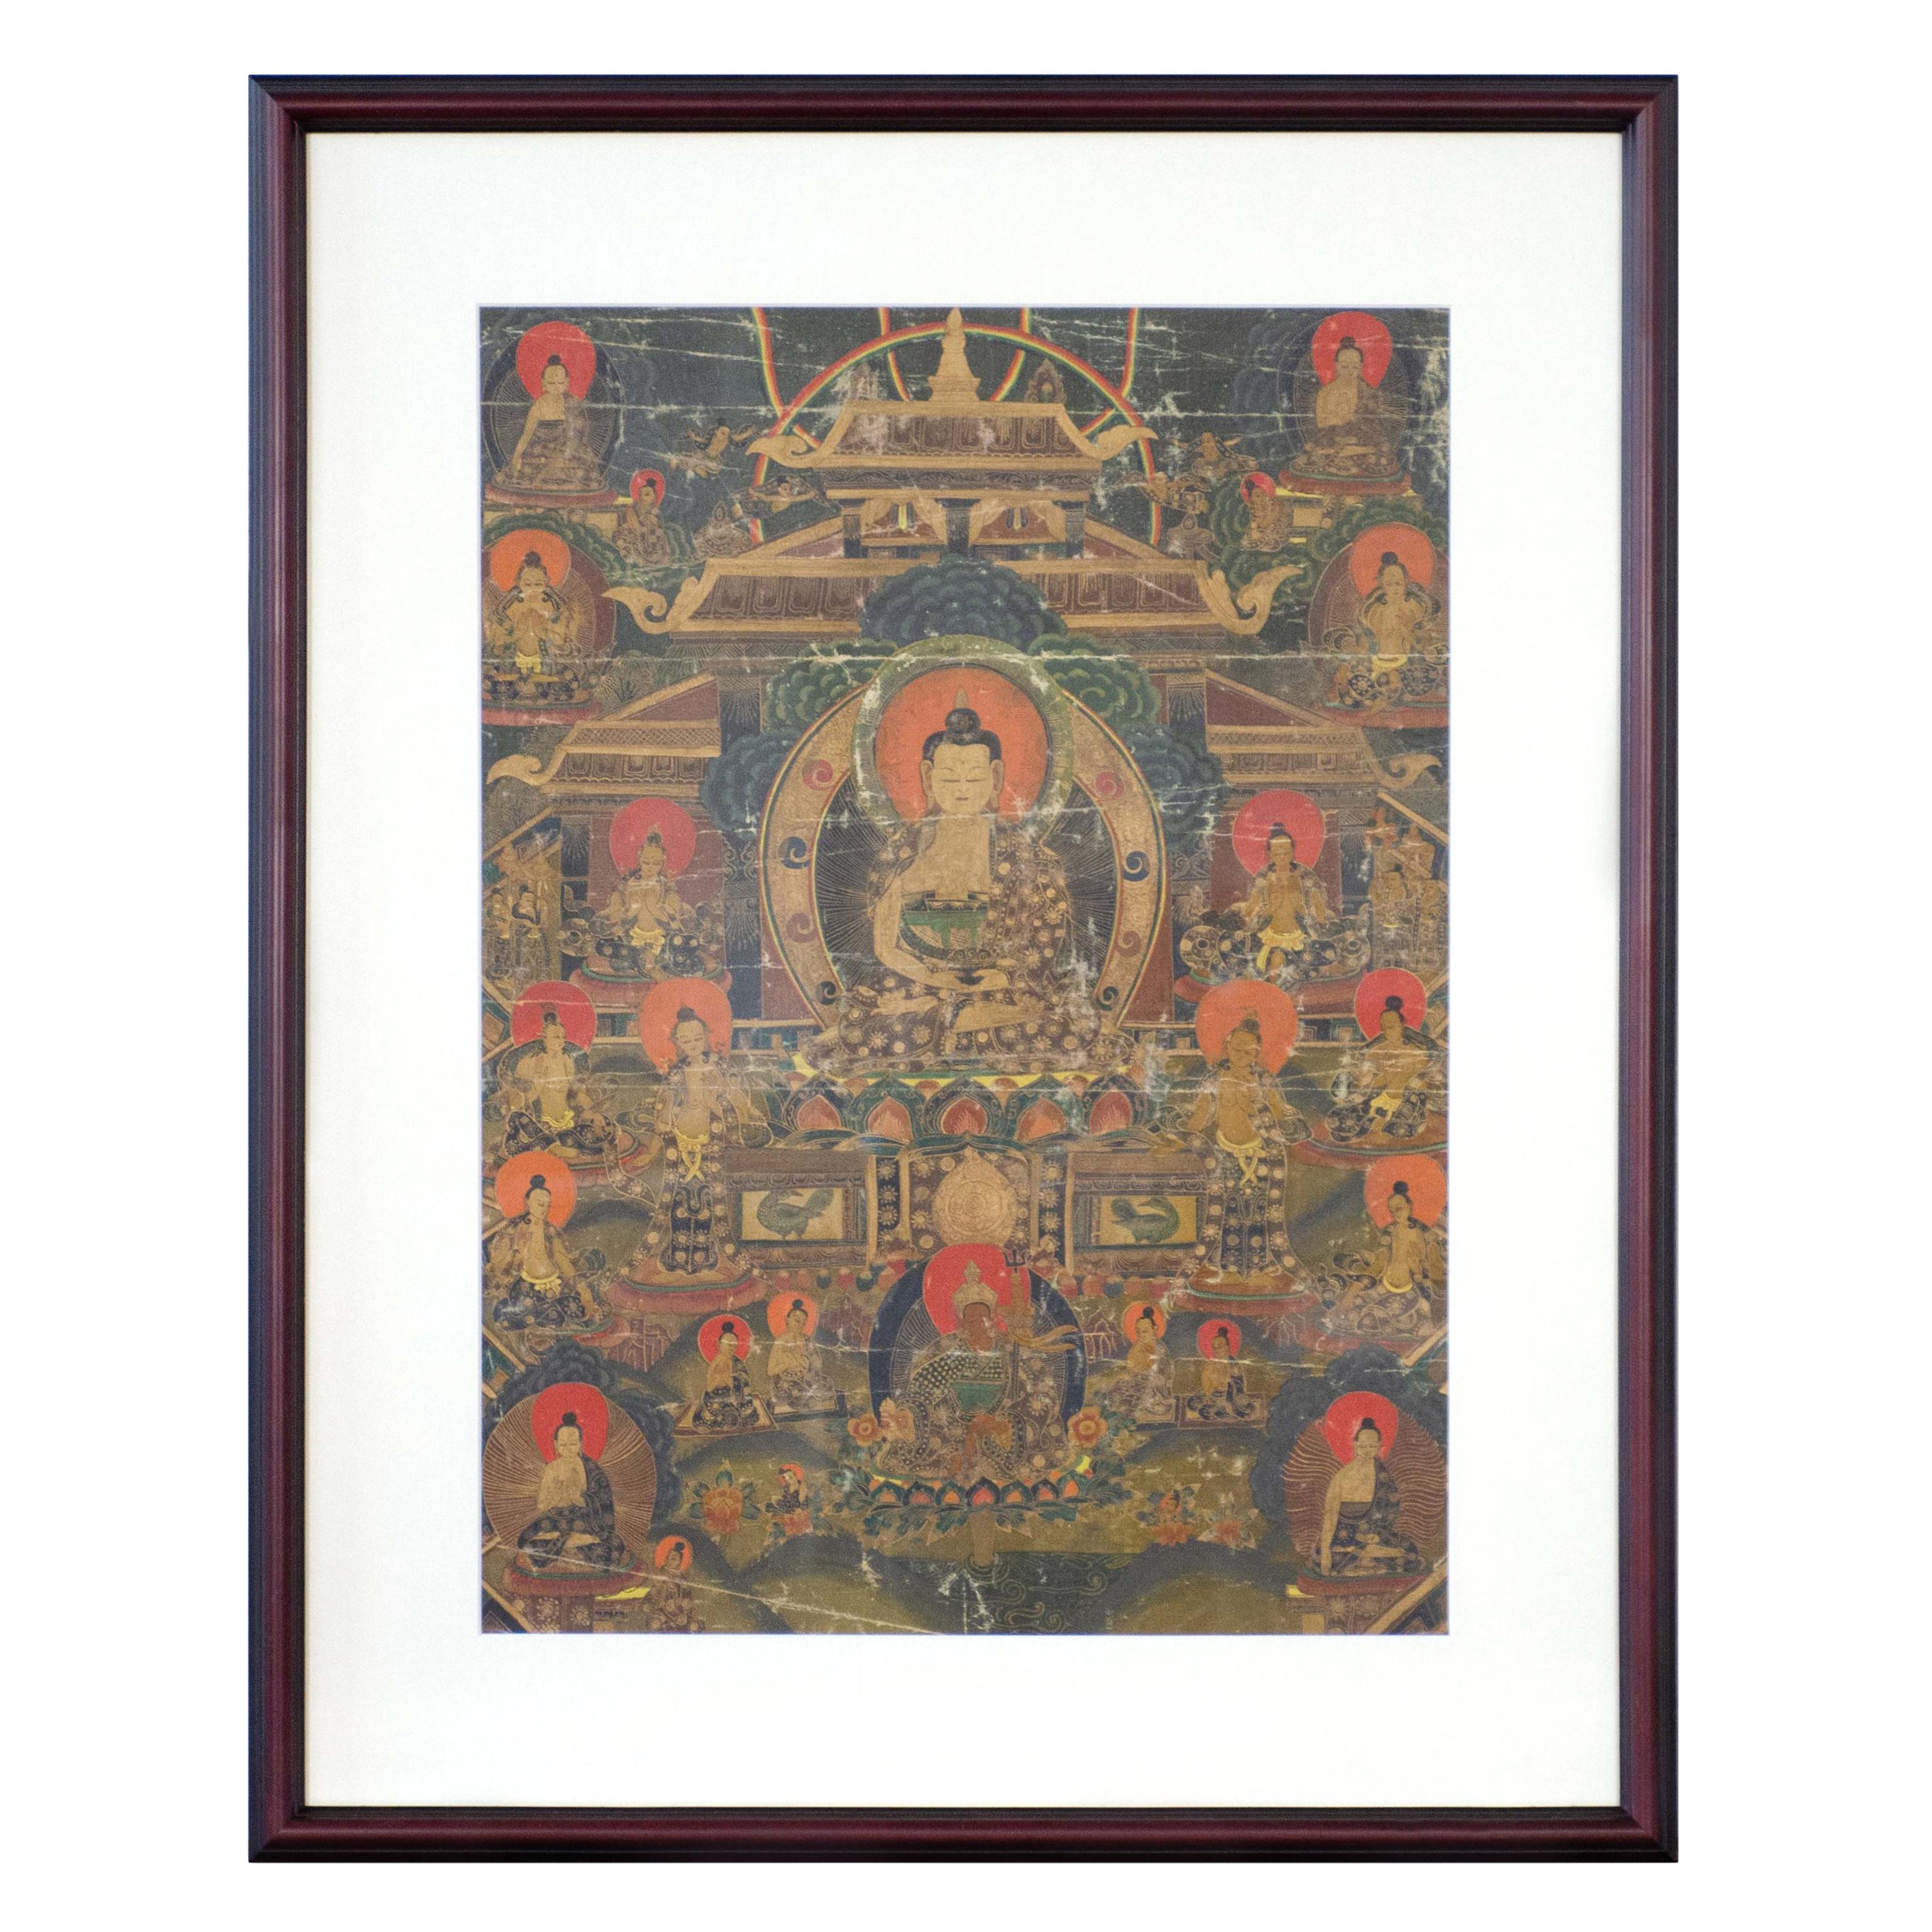 Vintage Hand-Painted Multi-Colored Tibetan Thangka Painting Depicting the Buddha